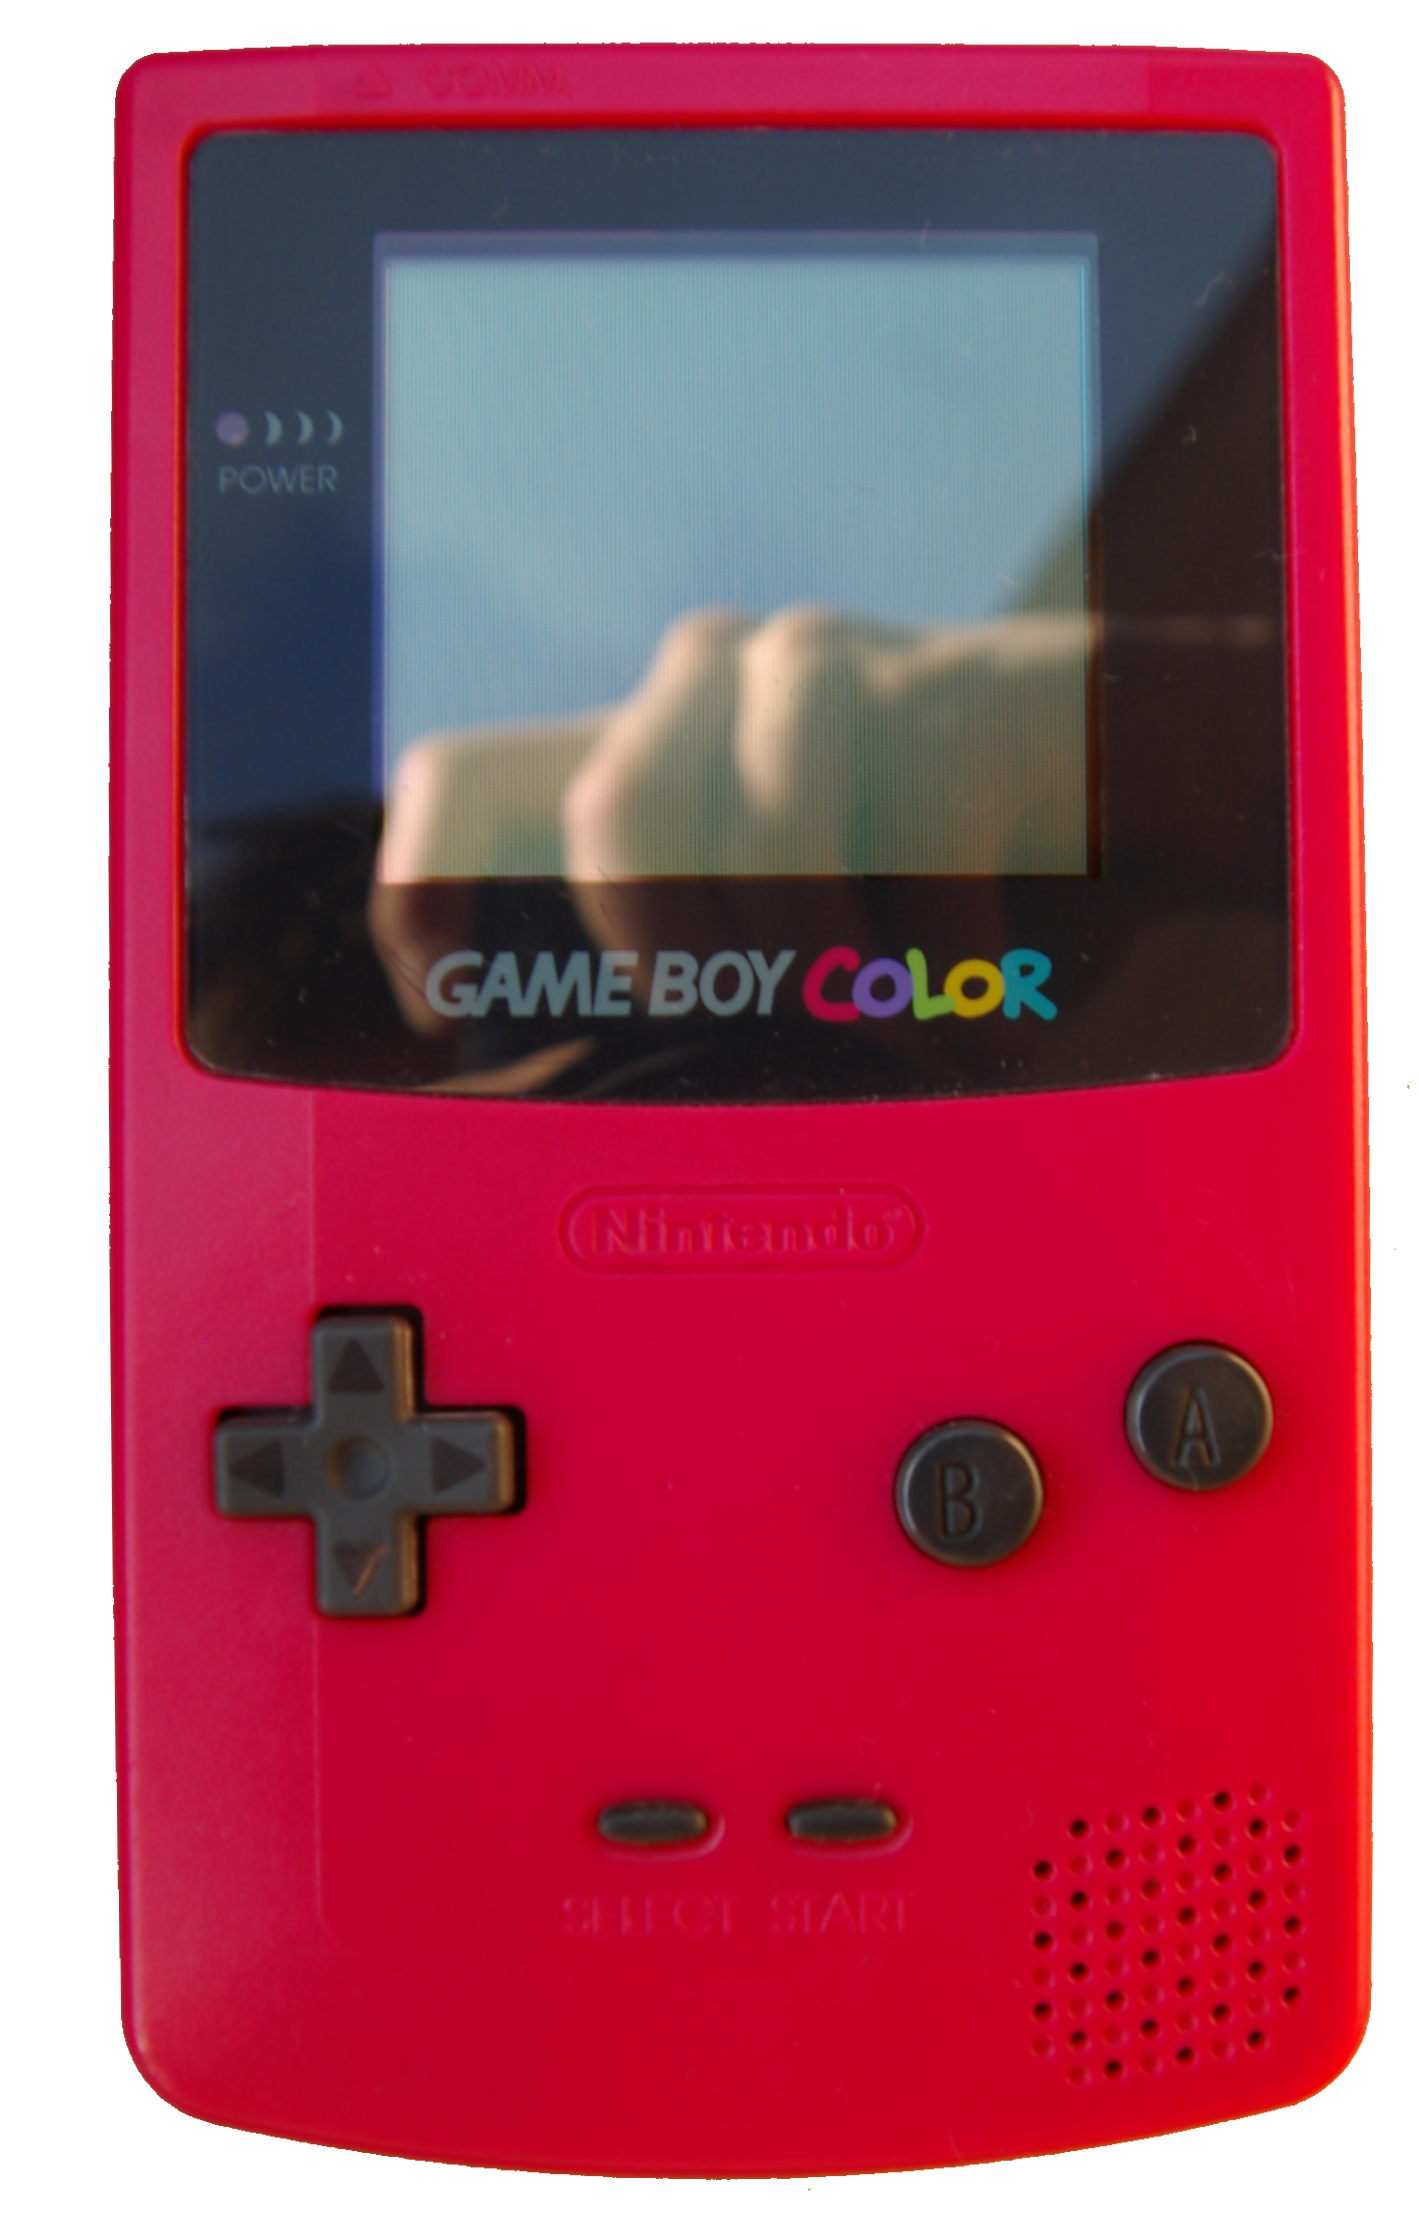 Game Boy Color | WikiDex | FANDOM powered by Wikia